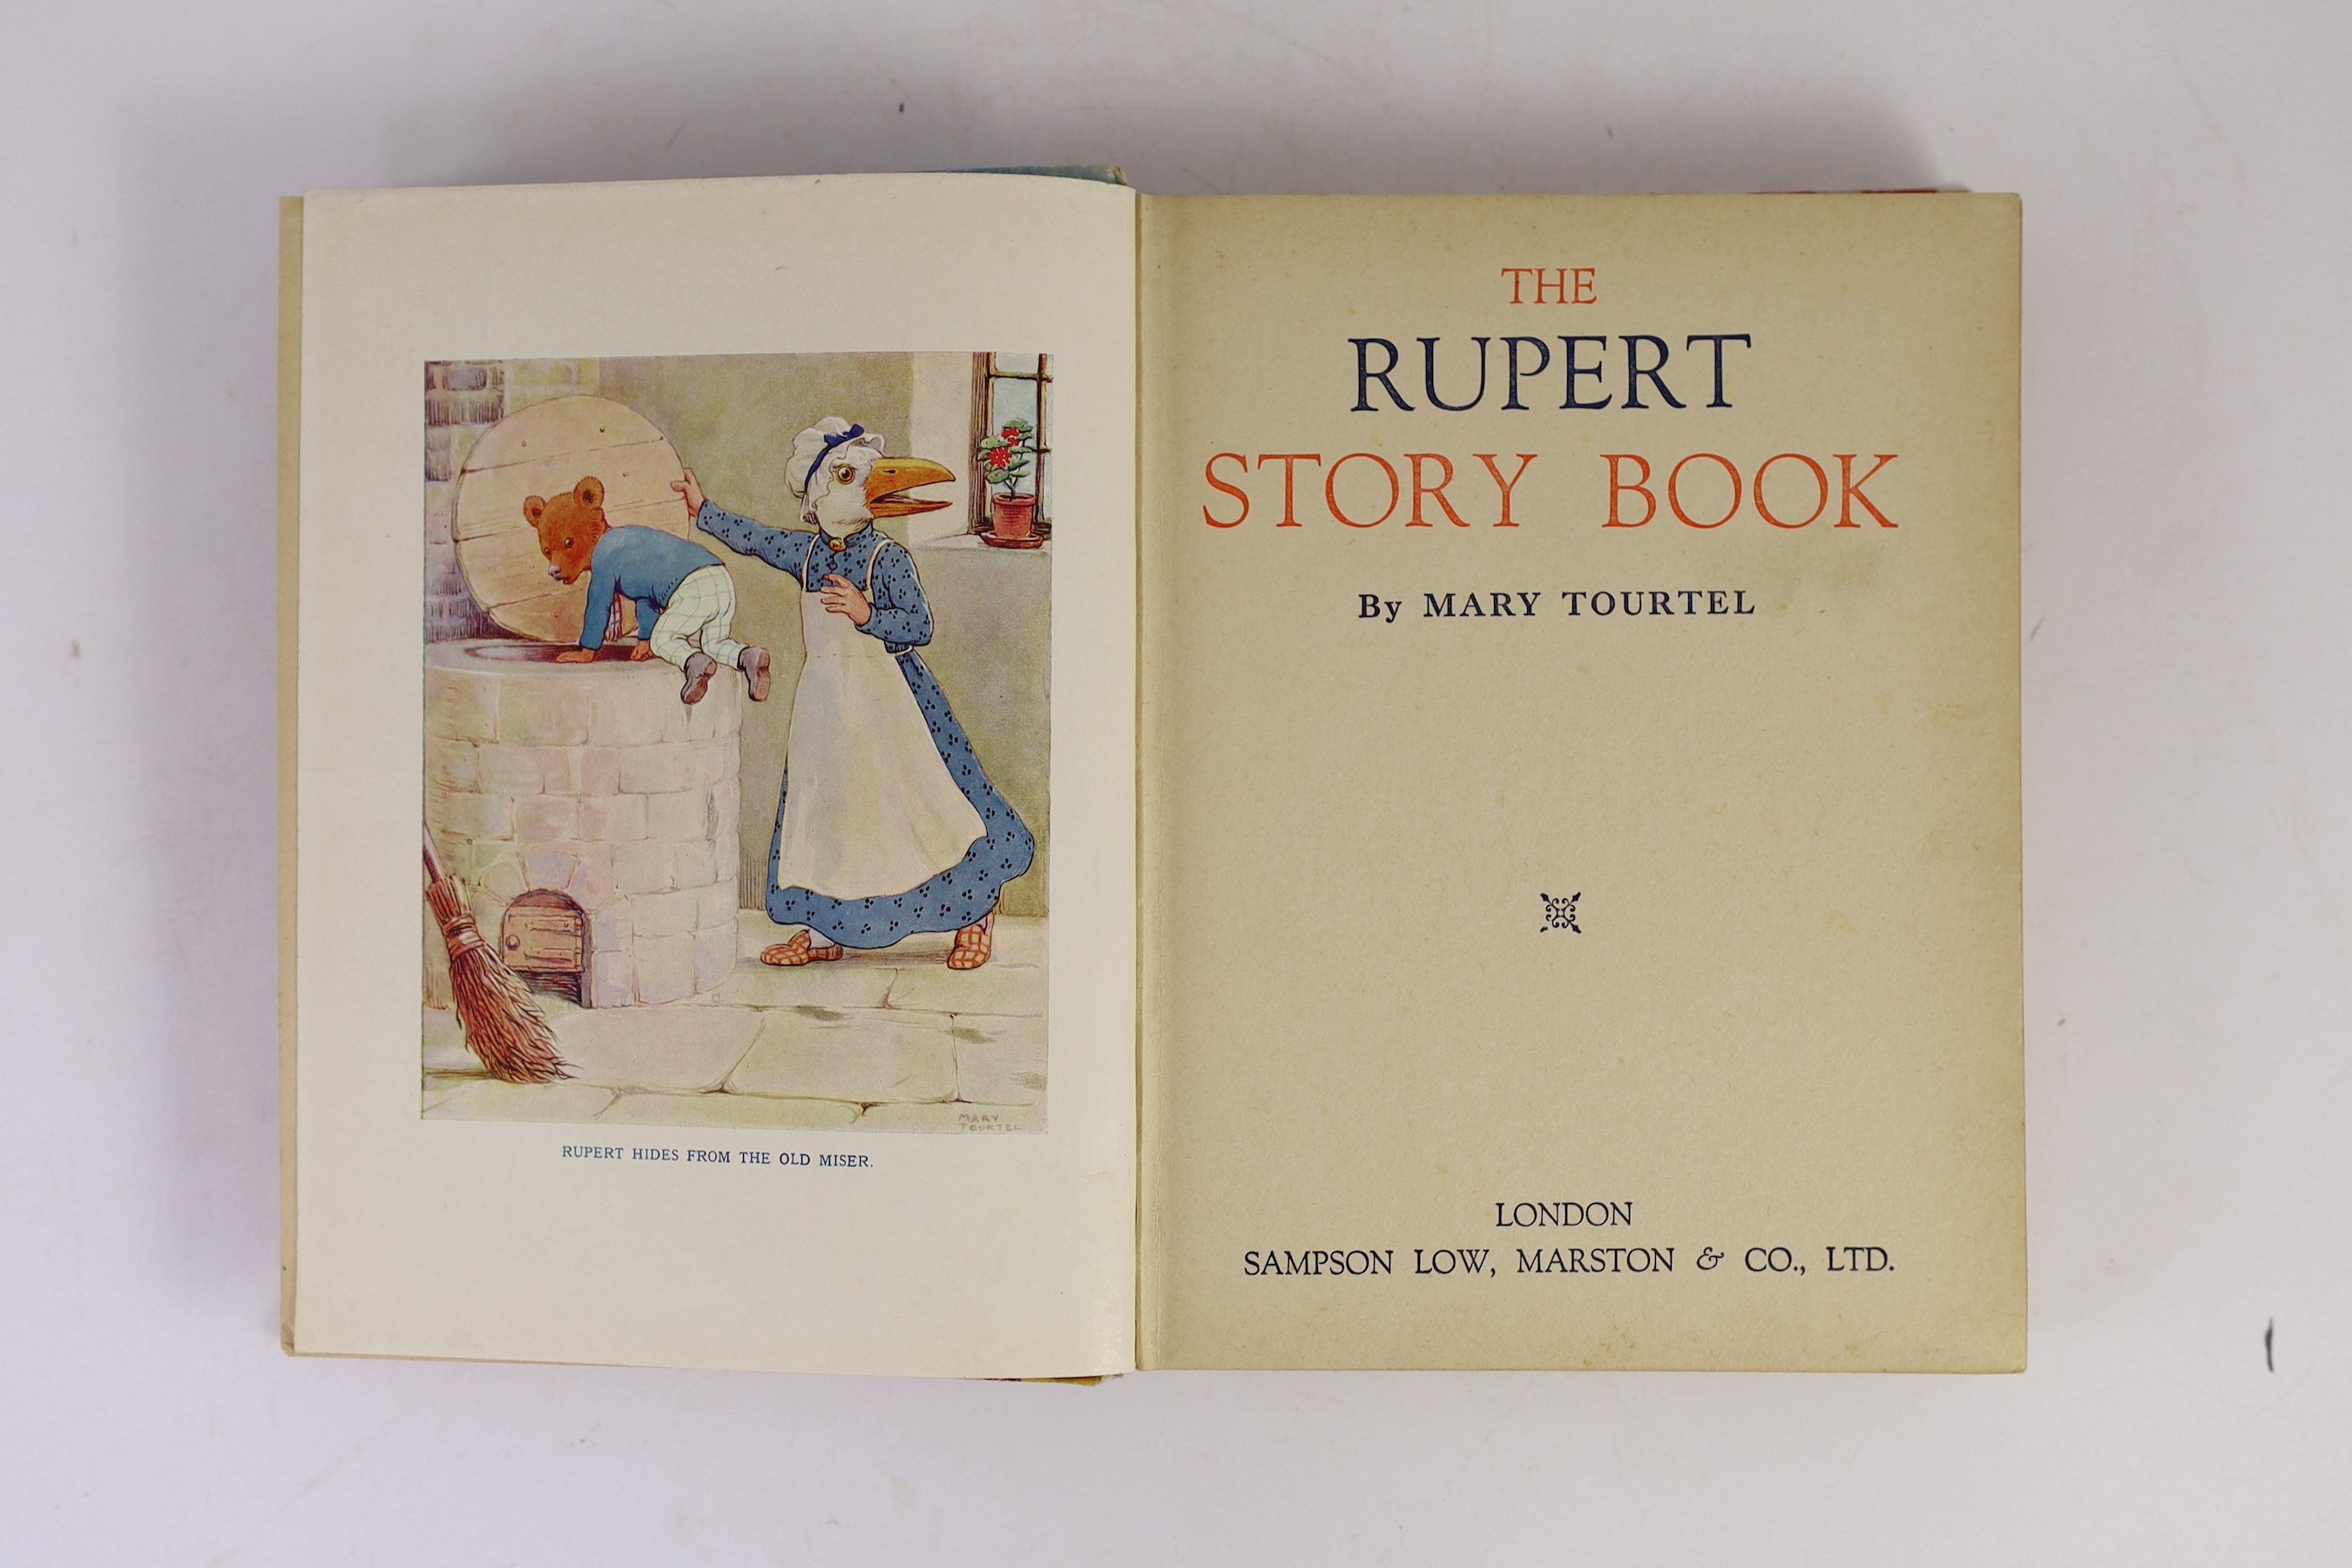 Tourtel, Mary - The Rupert Story Book, 1st edition, 4to, pictorial boards, ownership inscription neatly written in ‘’belongs to’’ box, Samson Low, Marston & Co., Ltd., London, 1938